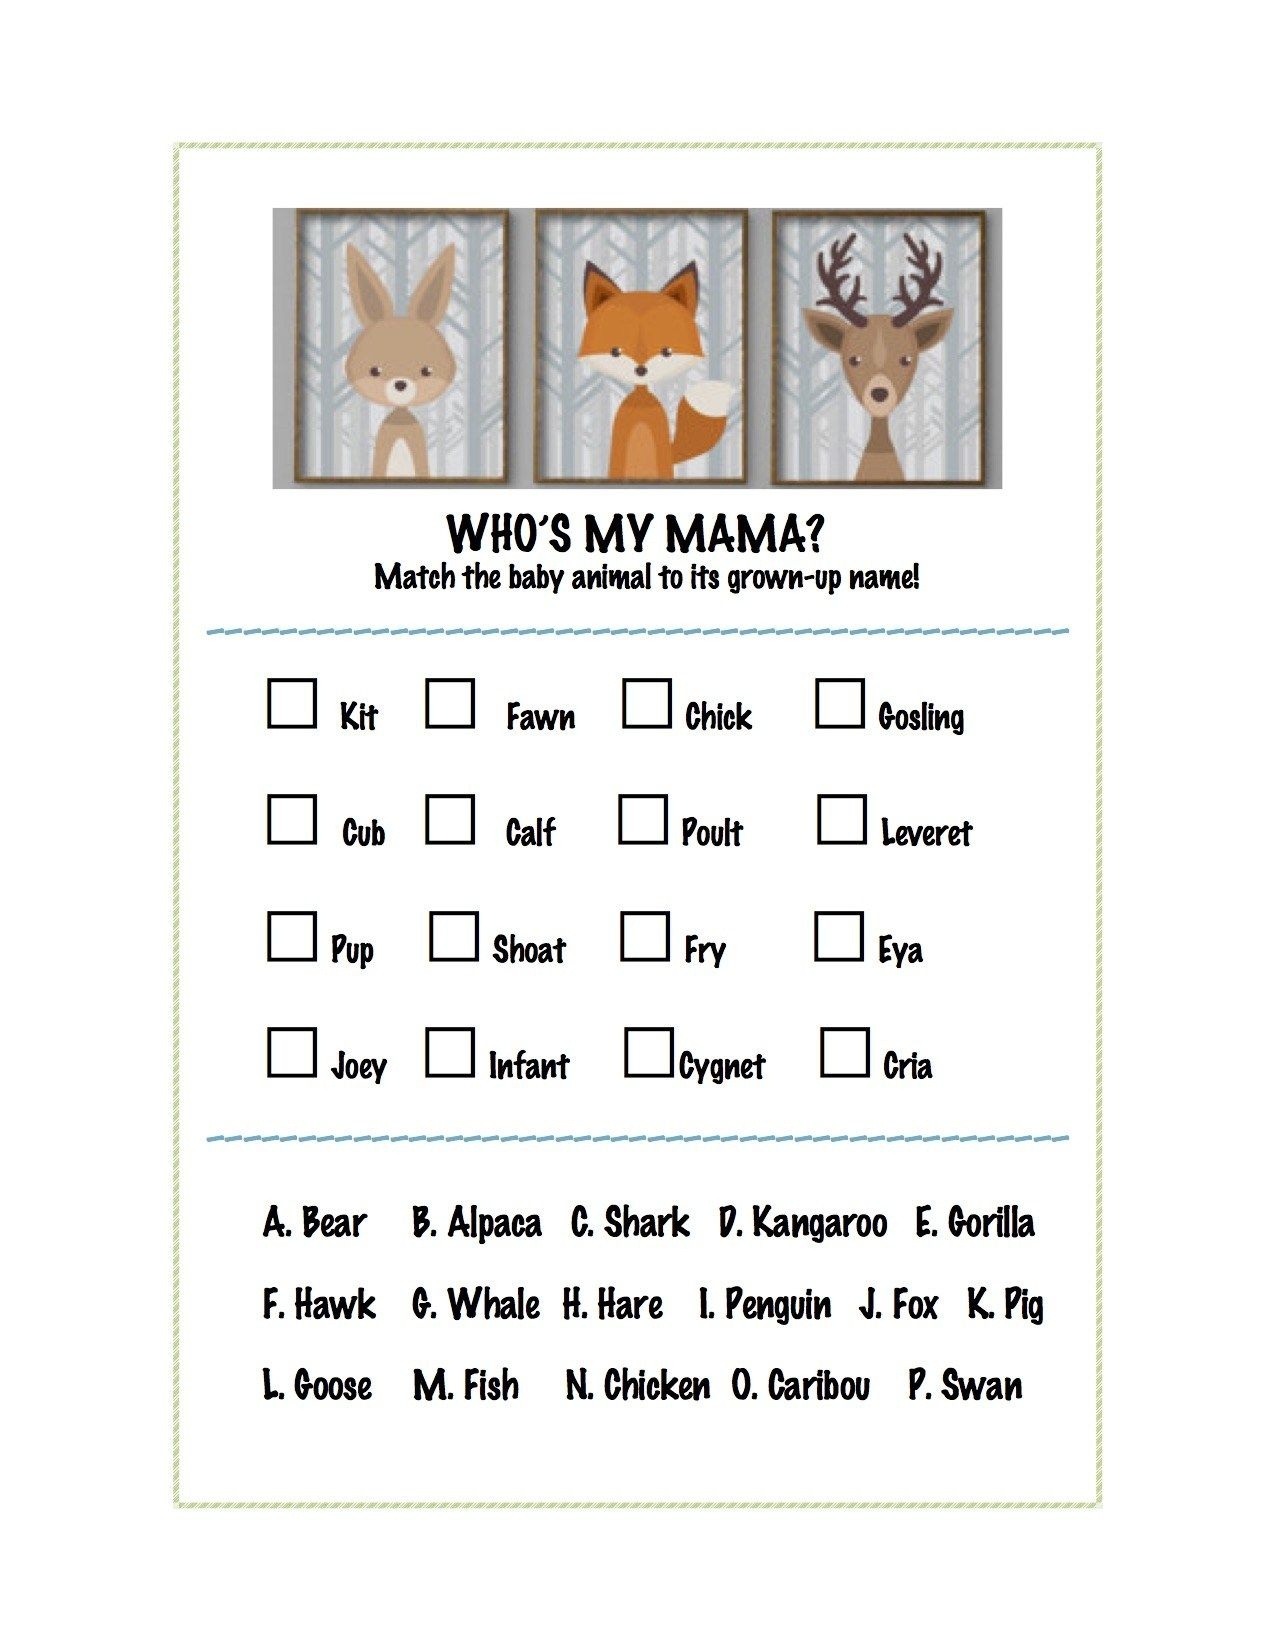 Baby-Animal-Names-Game-Free-Printable | Grand Baby Boy Shower In - Free Printable Pictures Of Baby Animals